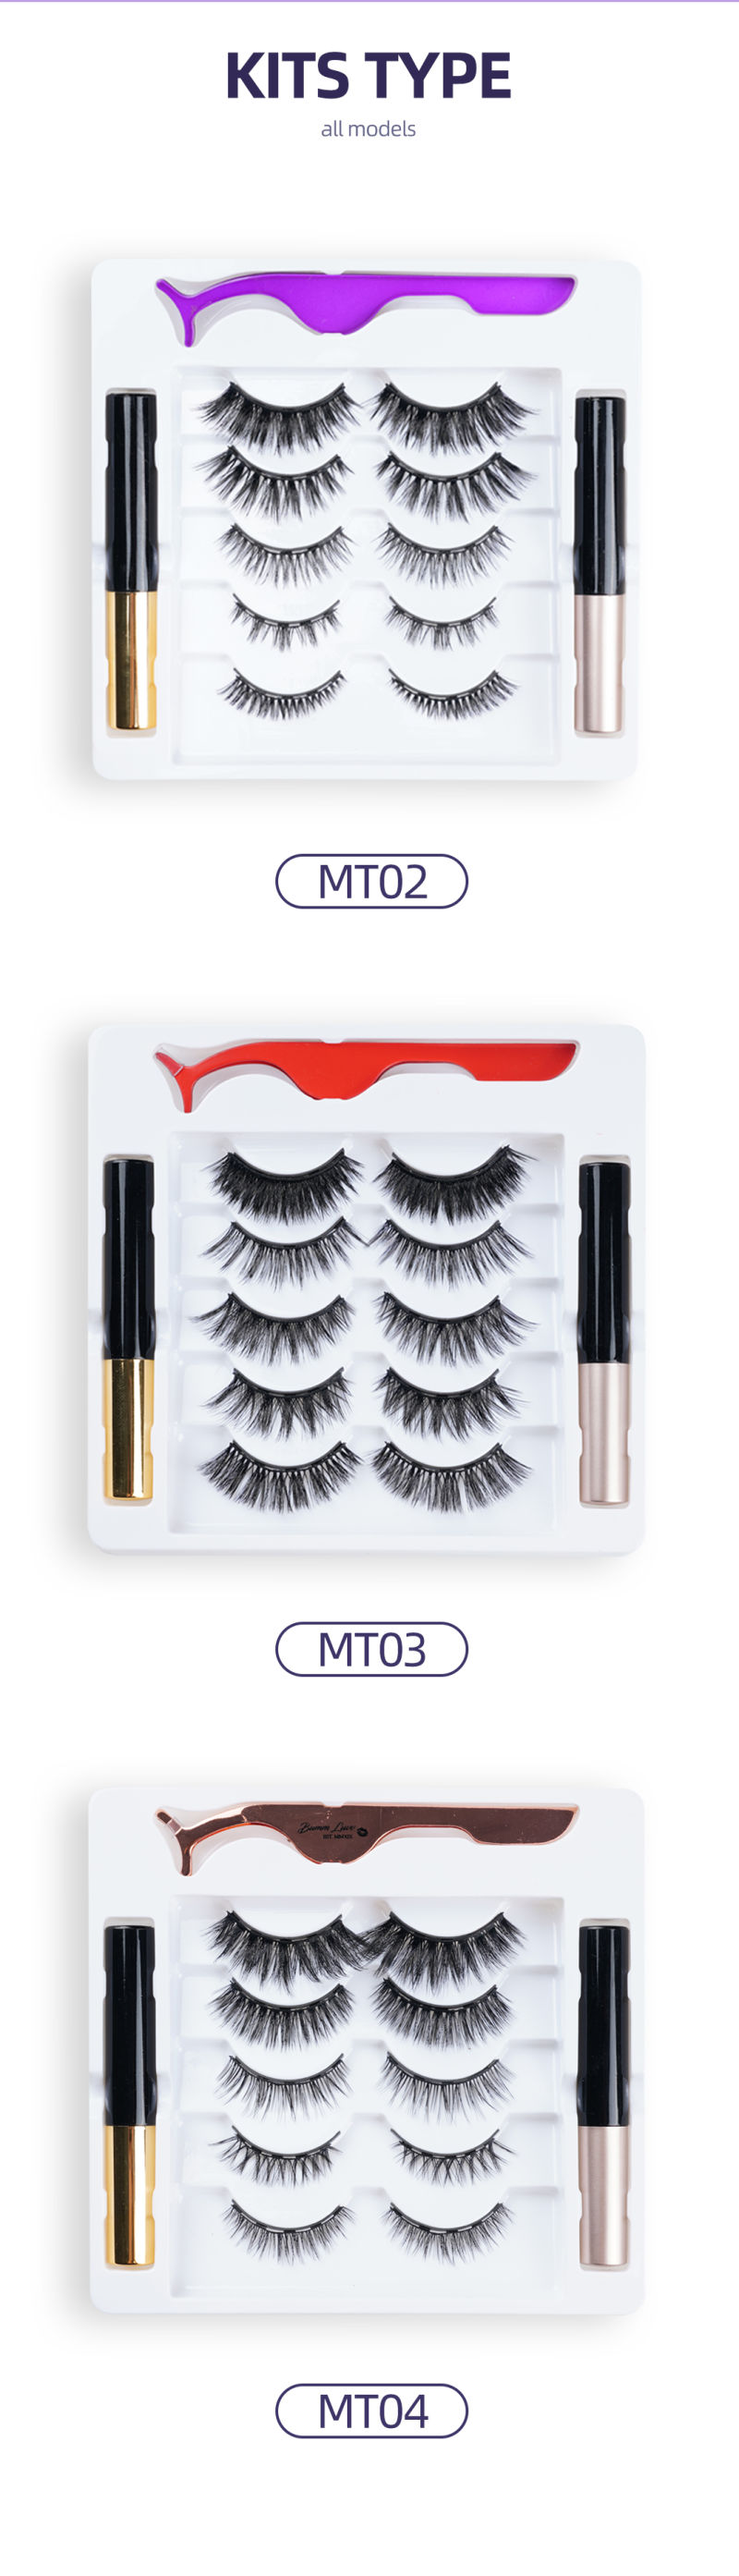 New Free Samples 3D Faux Mink 5D Faux Mink Real Mink Private Label Pure Mink Eyelashes